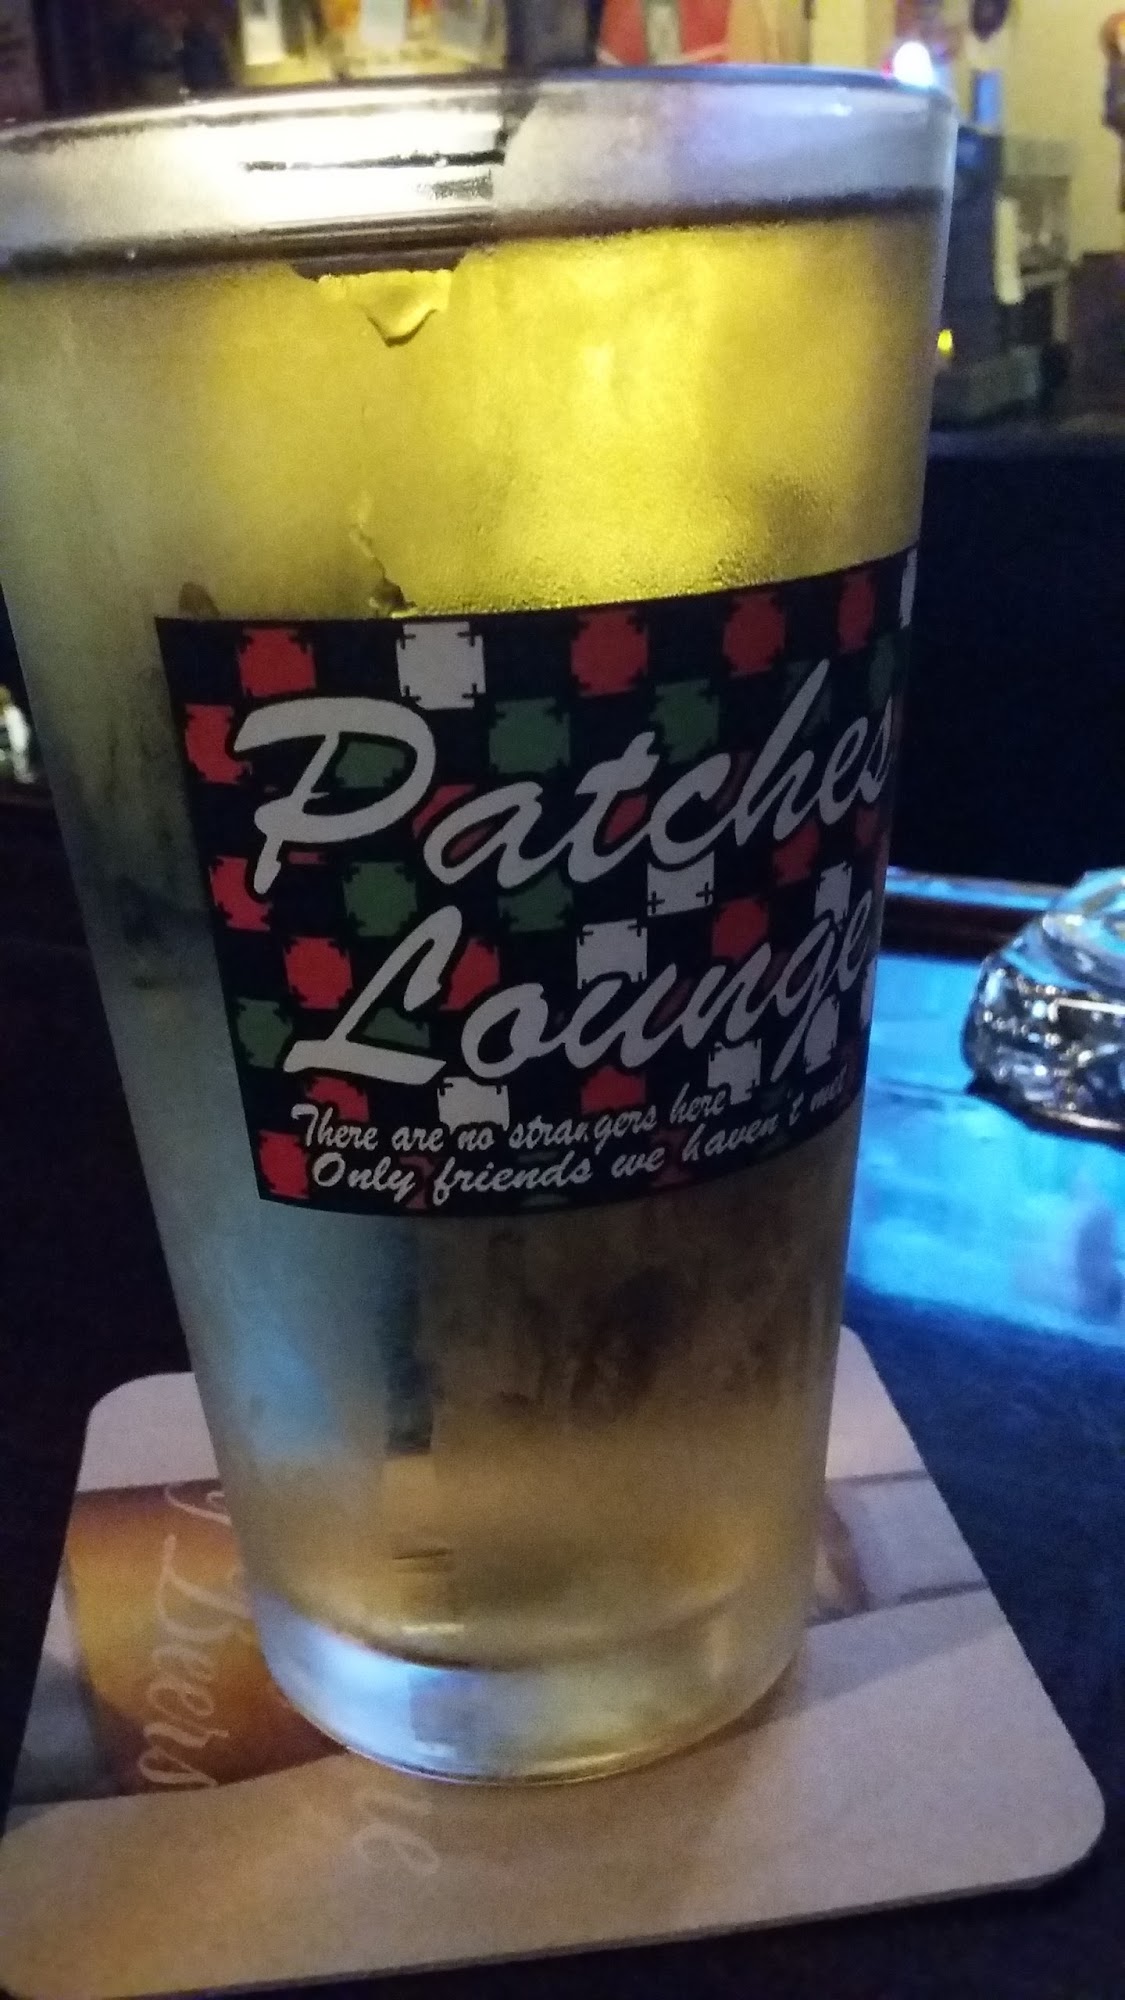 Patches Lounge